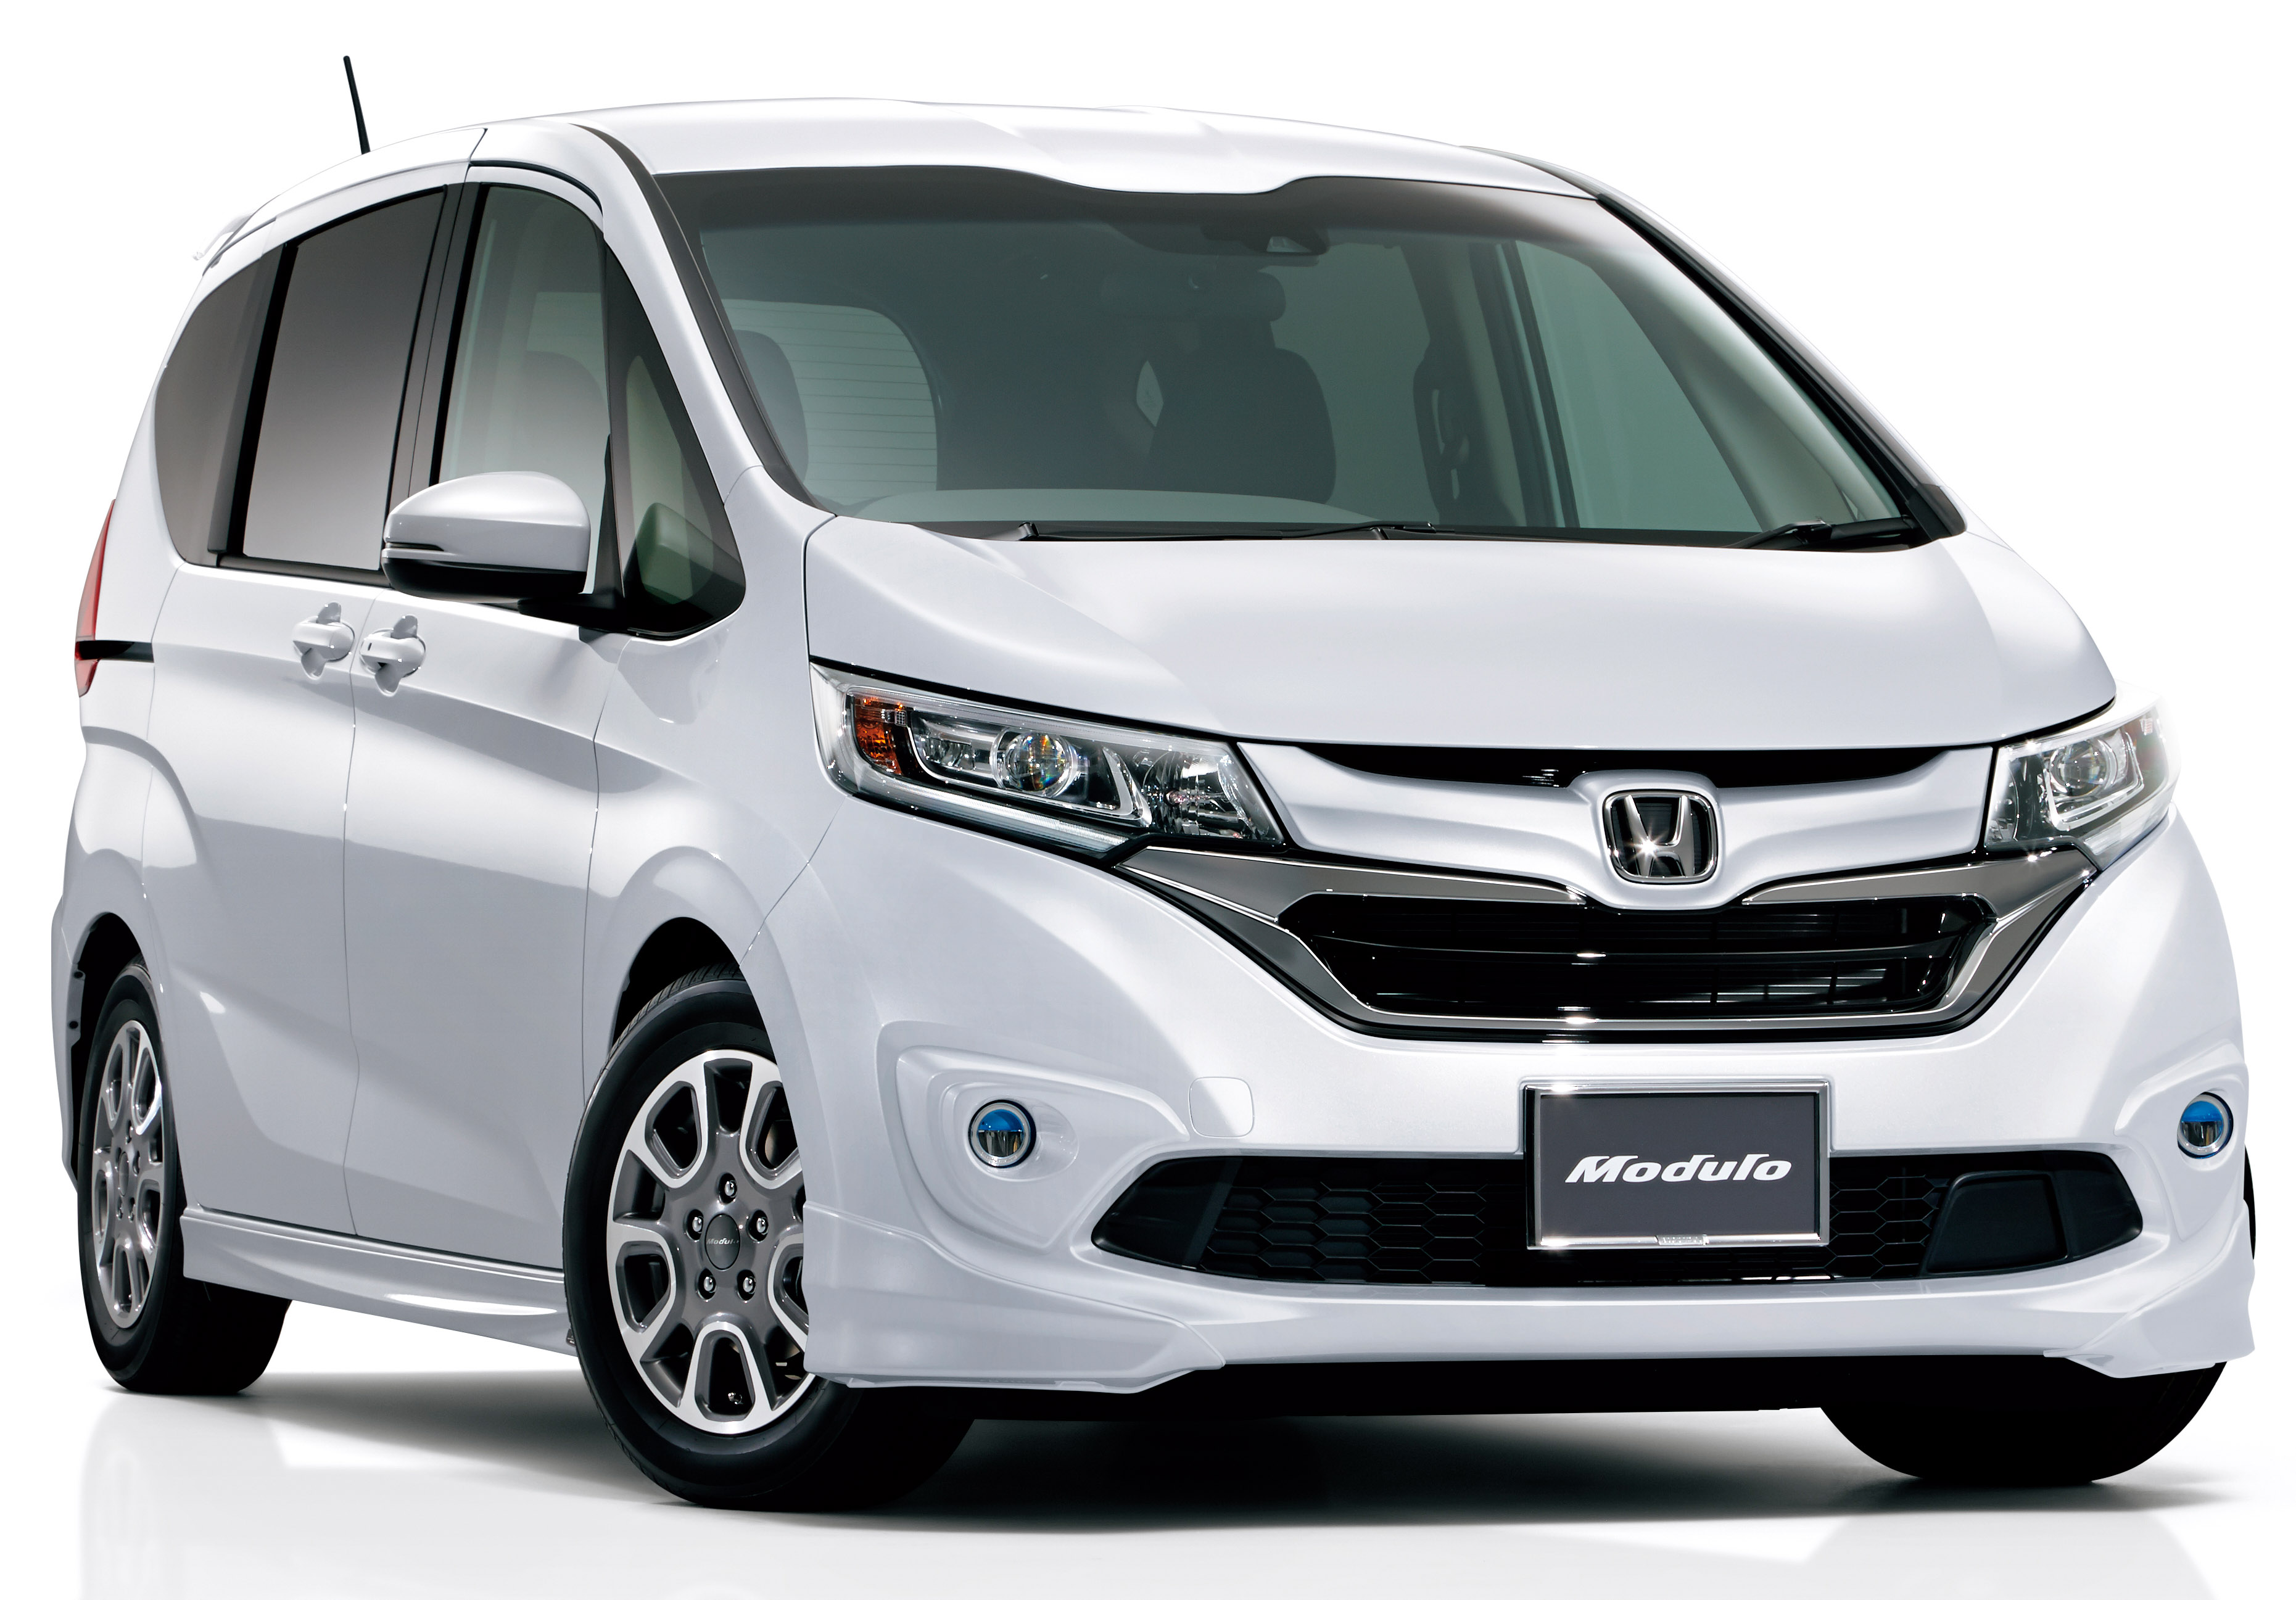 All-new 2016 Honda Freed goes on sale in Japan Image 549905